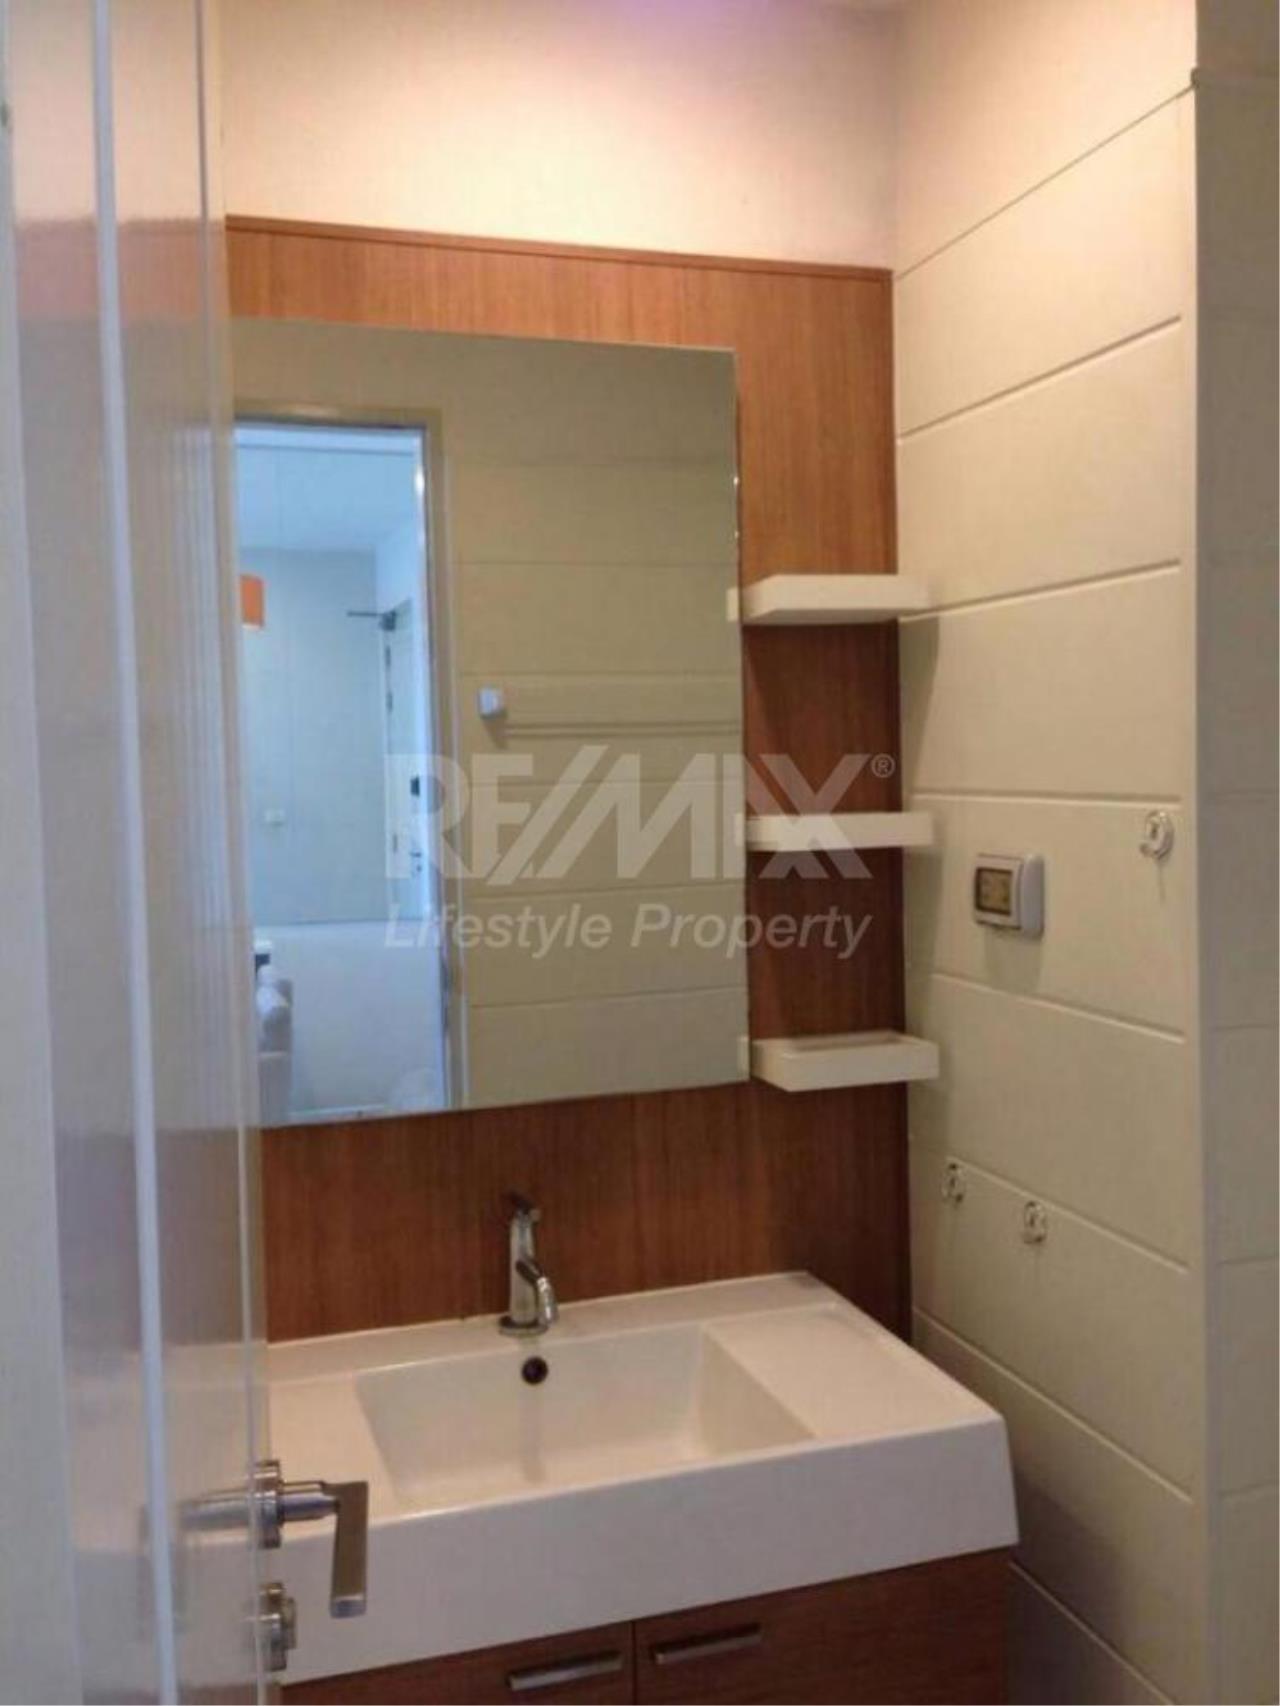 RE/MAX LifeStyle Property Agency's Q. House Condo Sathorn 4